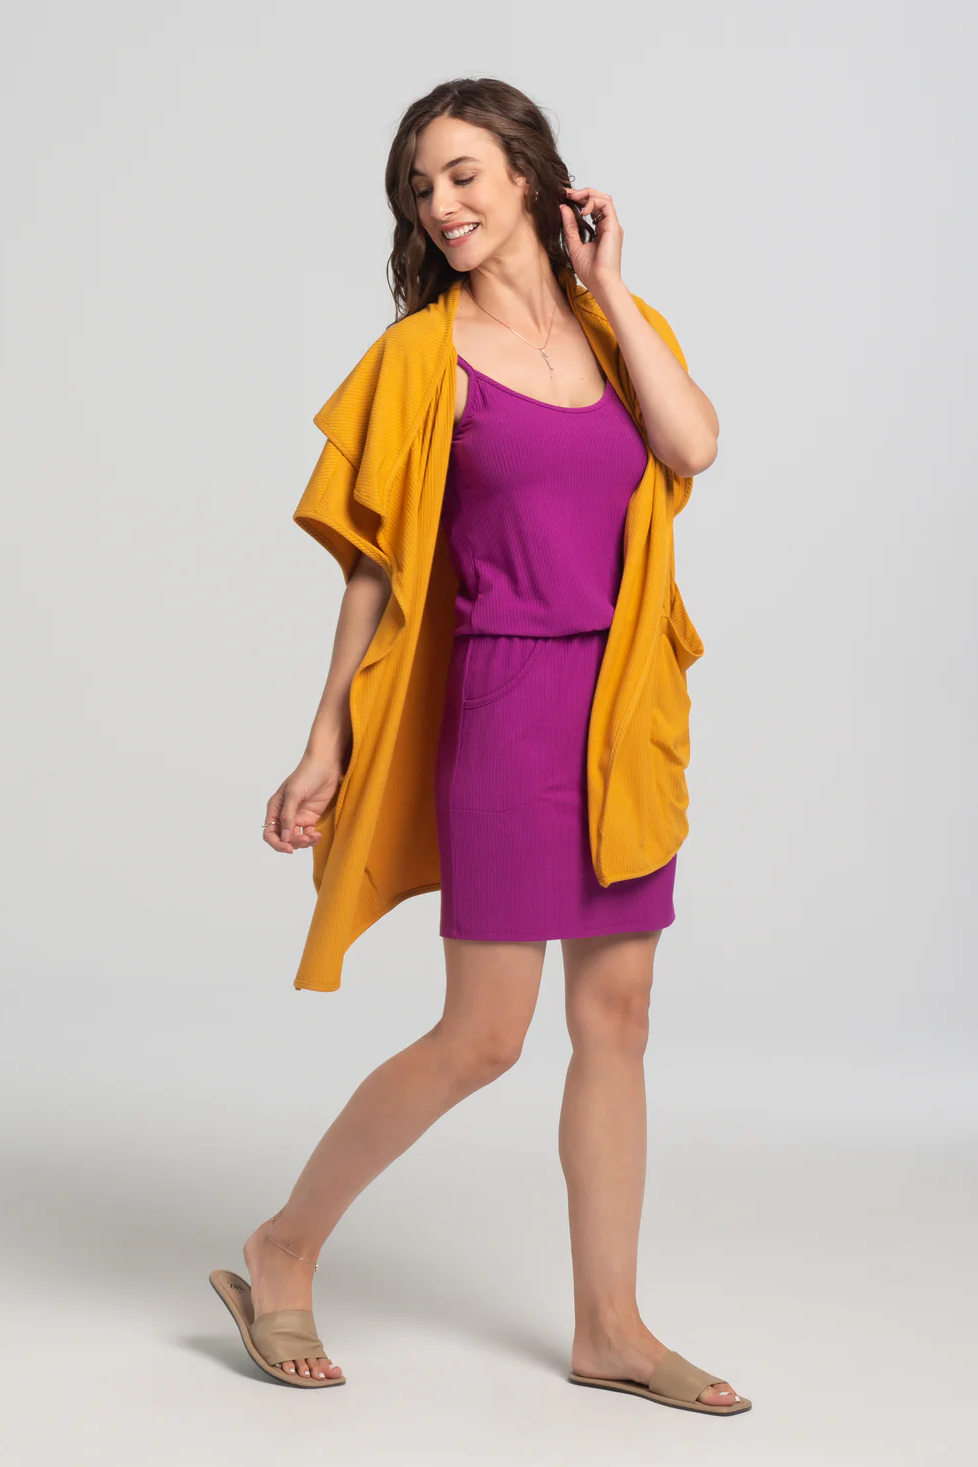 Damia Dress by Kollontai, Amethyst, tank dress, spaghetti straps, bloused effect at waist, elastic waist, straight above the knee skirt, front slant pockets, bamboo rib knit, eco-fabric, sizes XS to XL, made in Montreal 